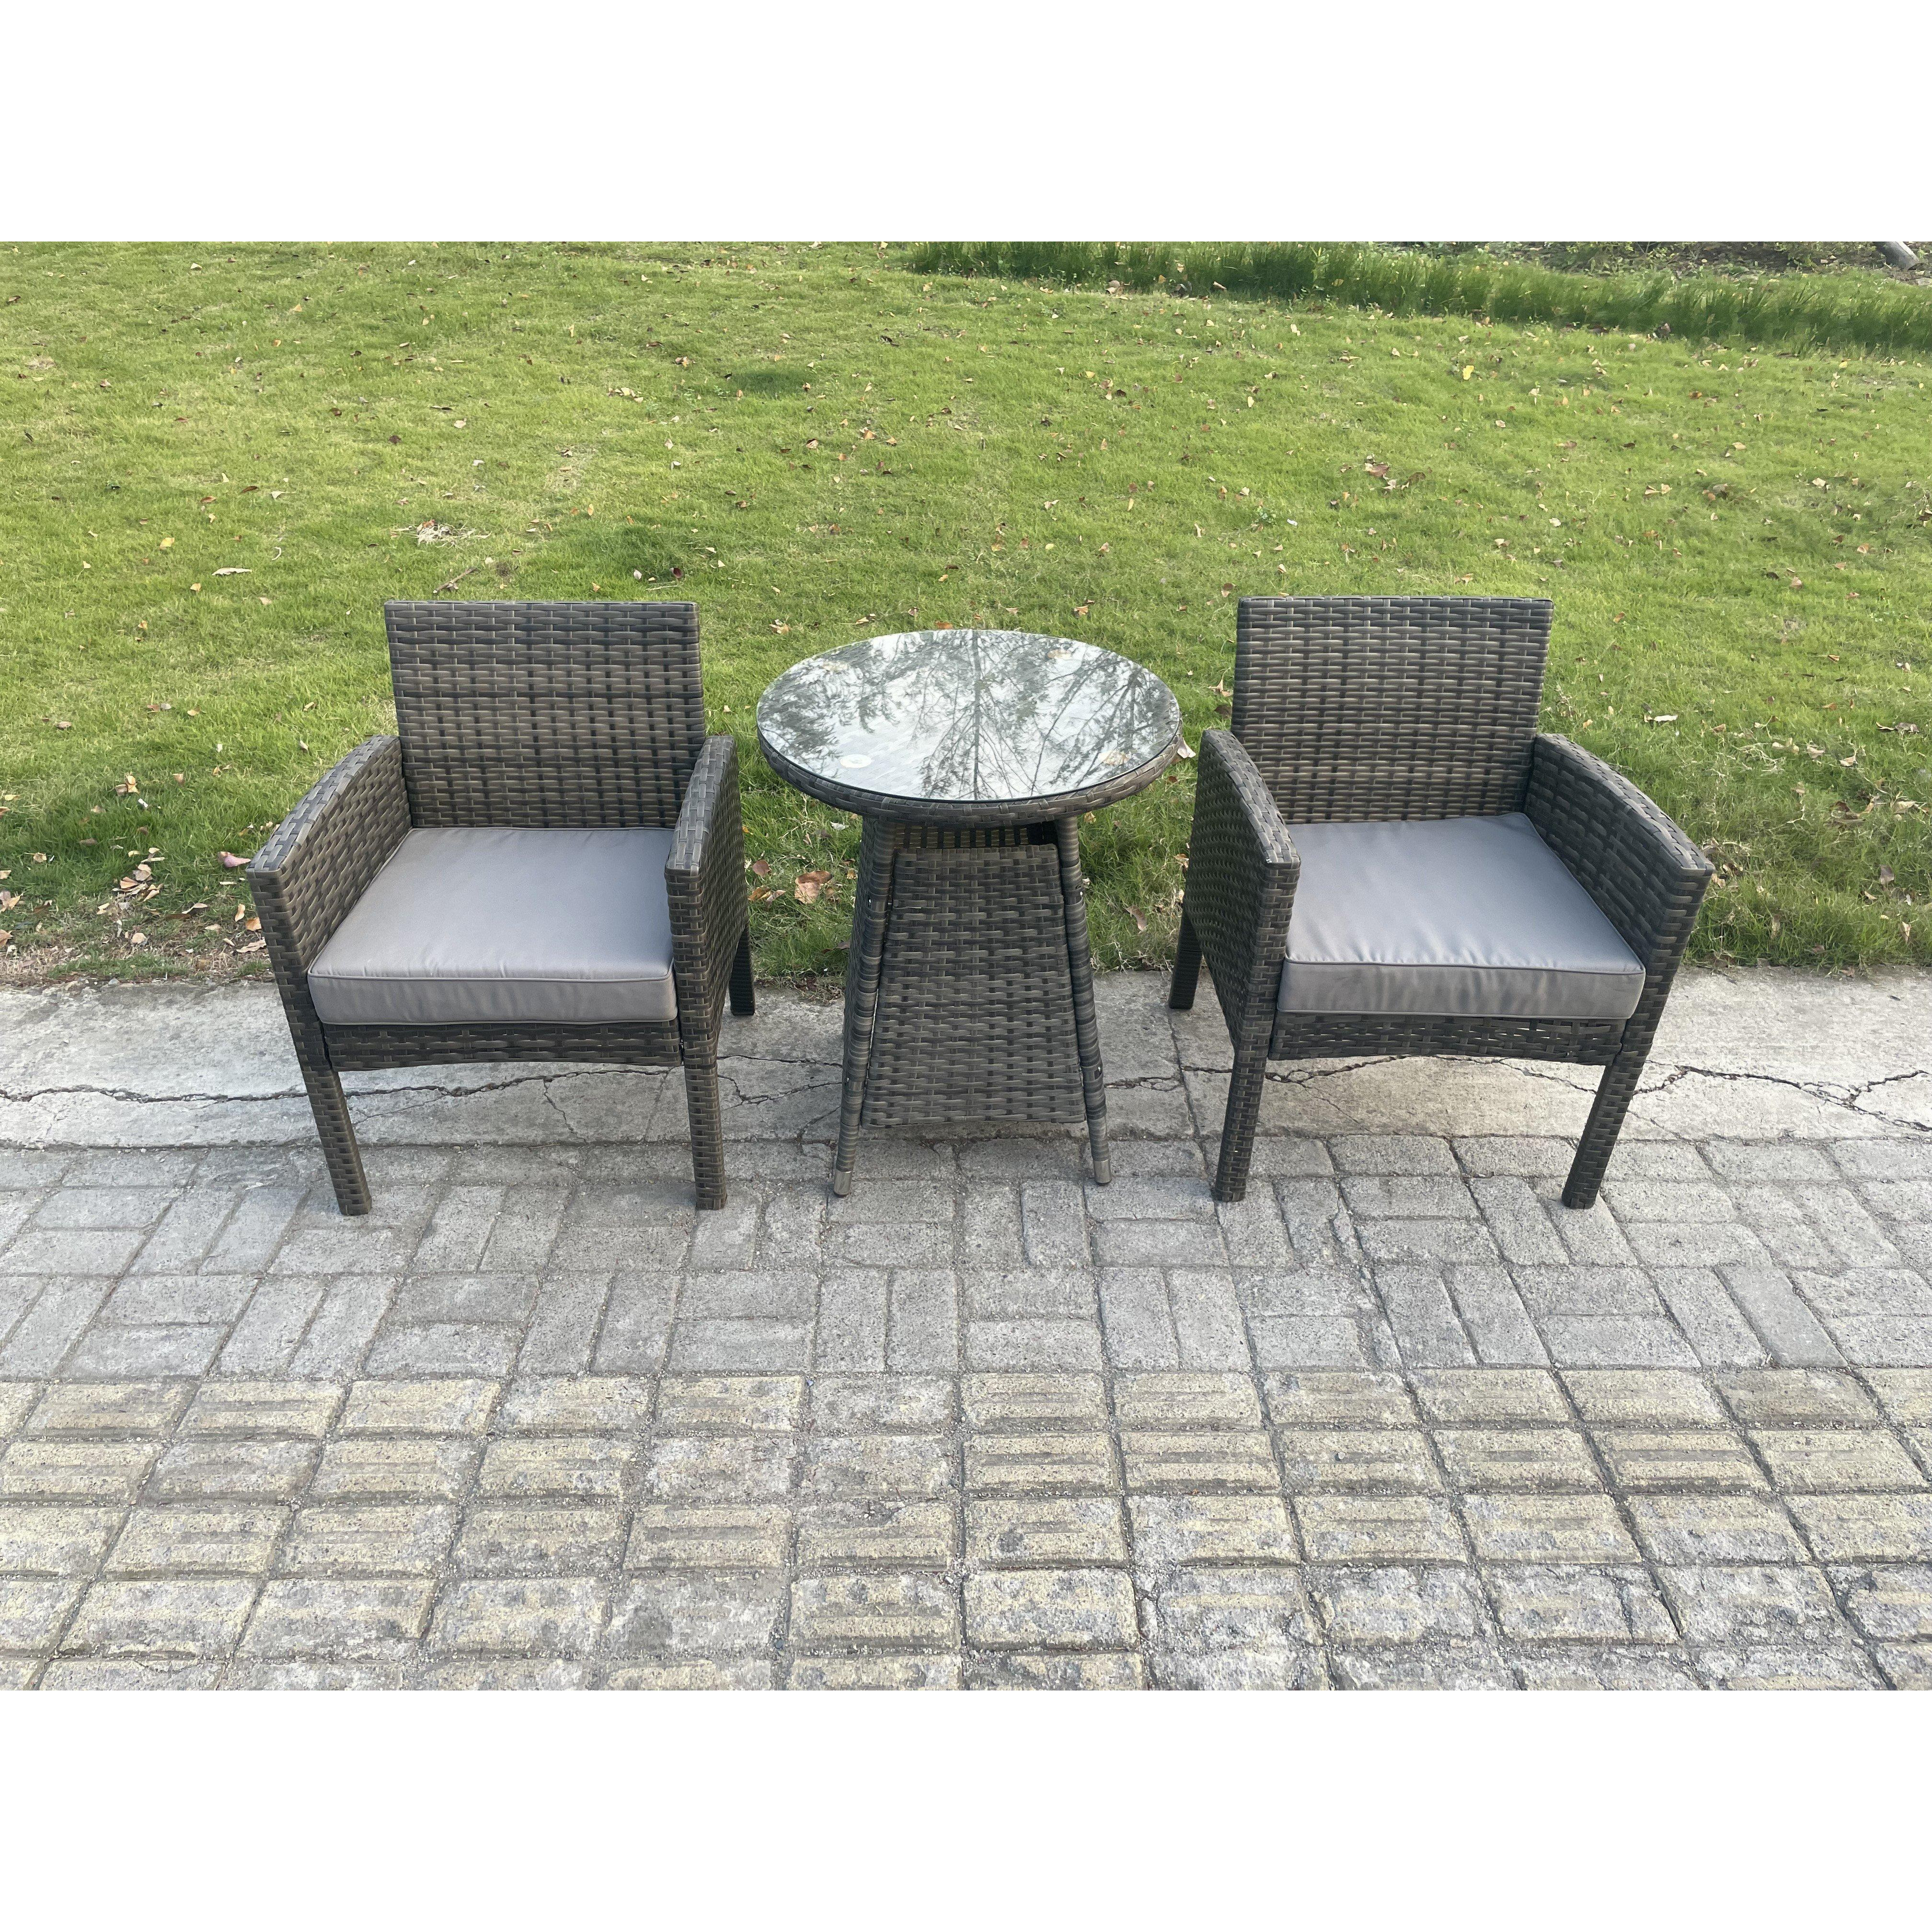 Wicker PE Outdoor Rattan Garden Furniture Arm Chair And Table Dining Sets 2 Seater Small Round Table Dark Grey Mixed - image 1